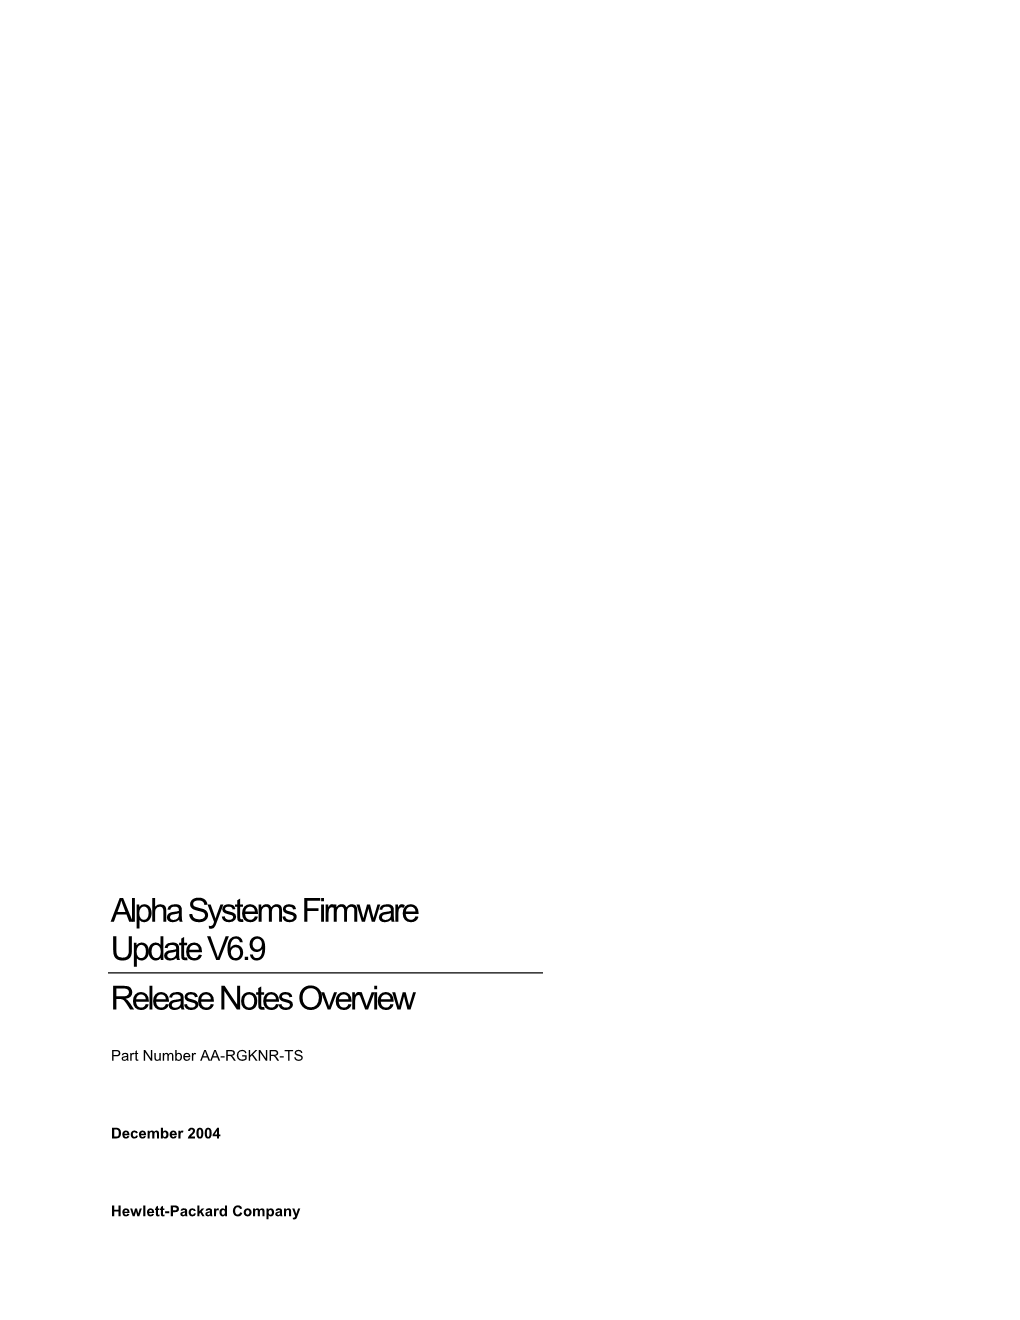 Alpha Systems Firmware Update V6.9 Release Notes Overview